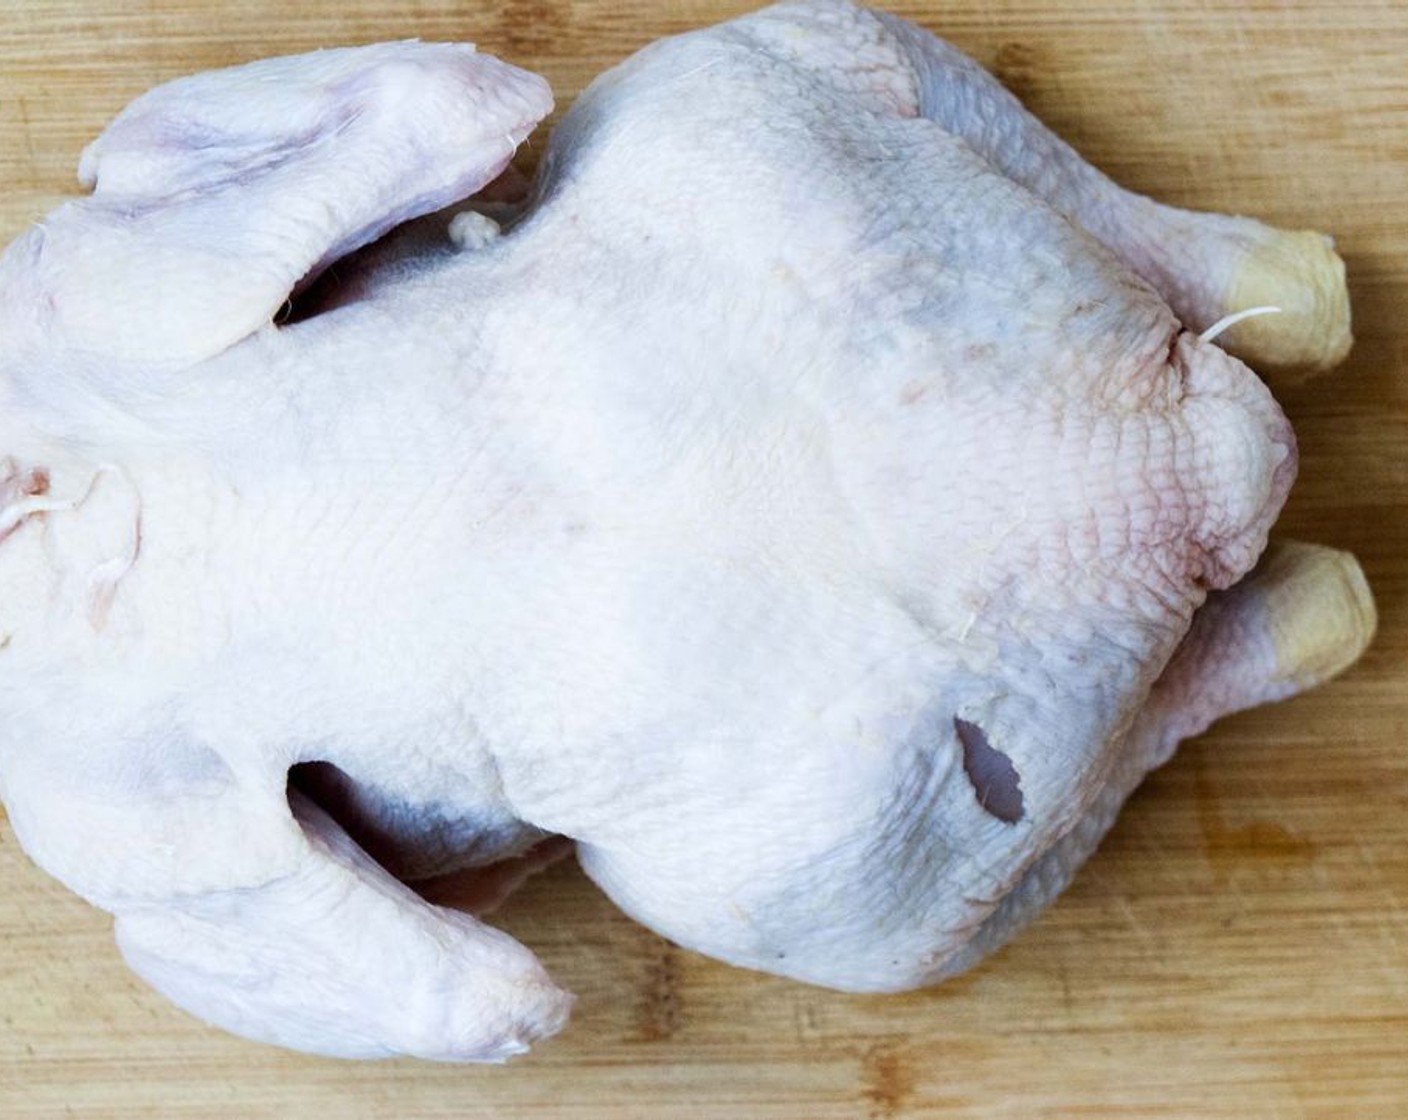 step 2 Remove the Whole Chicken (1) from its packaging, rinse inside and out and pat dry with paper towels. Season the inside with Salt (to taste) and Ground Black Pepper (to taste).